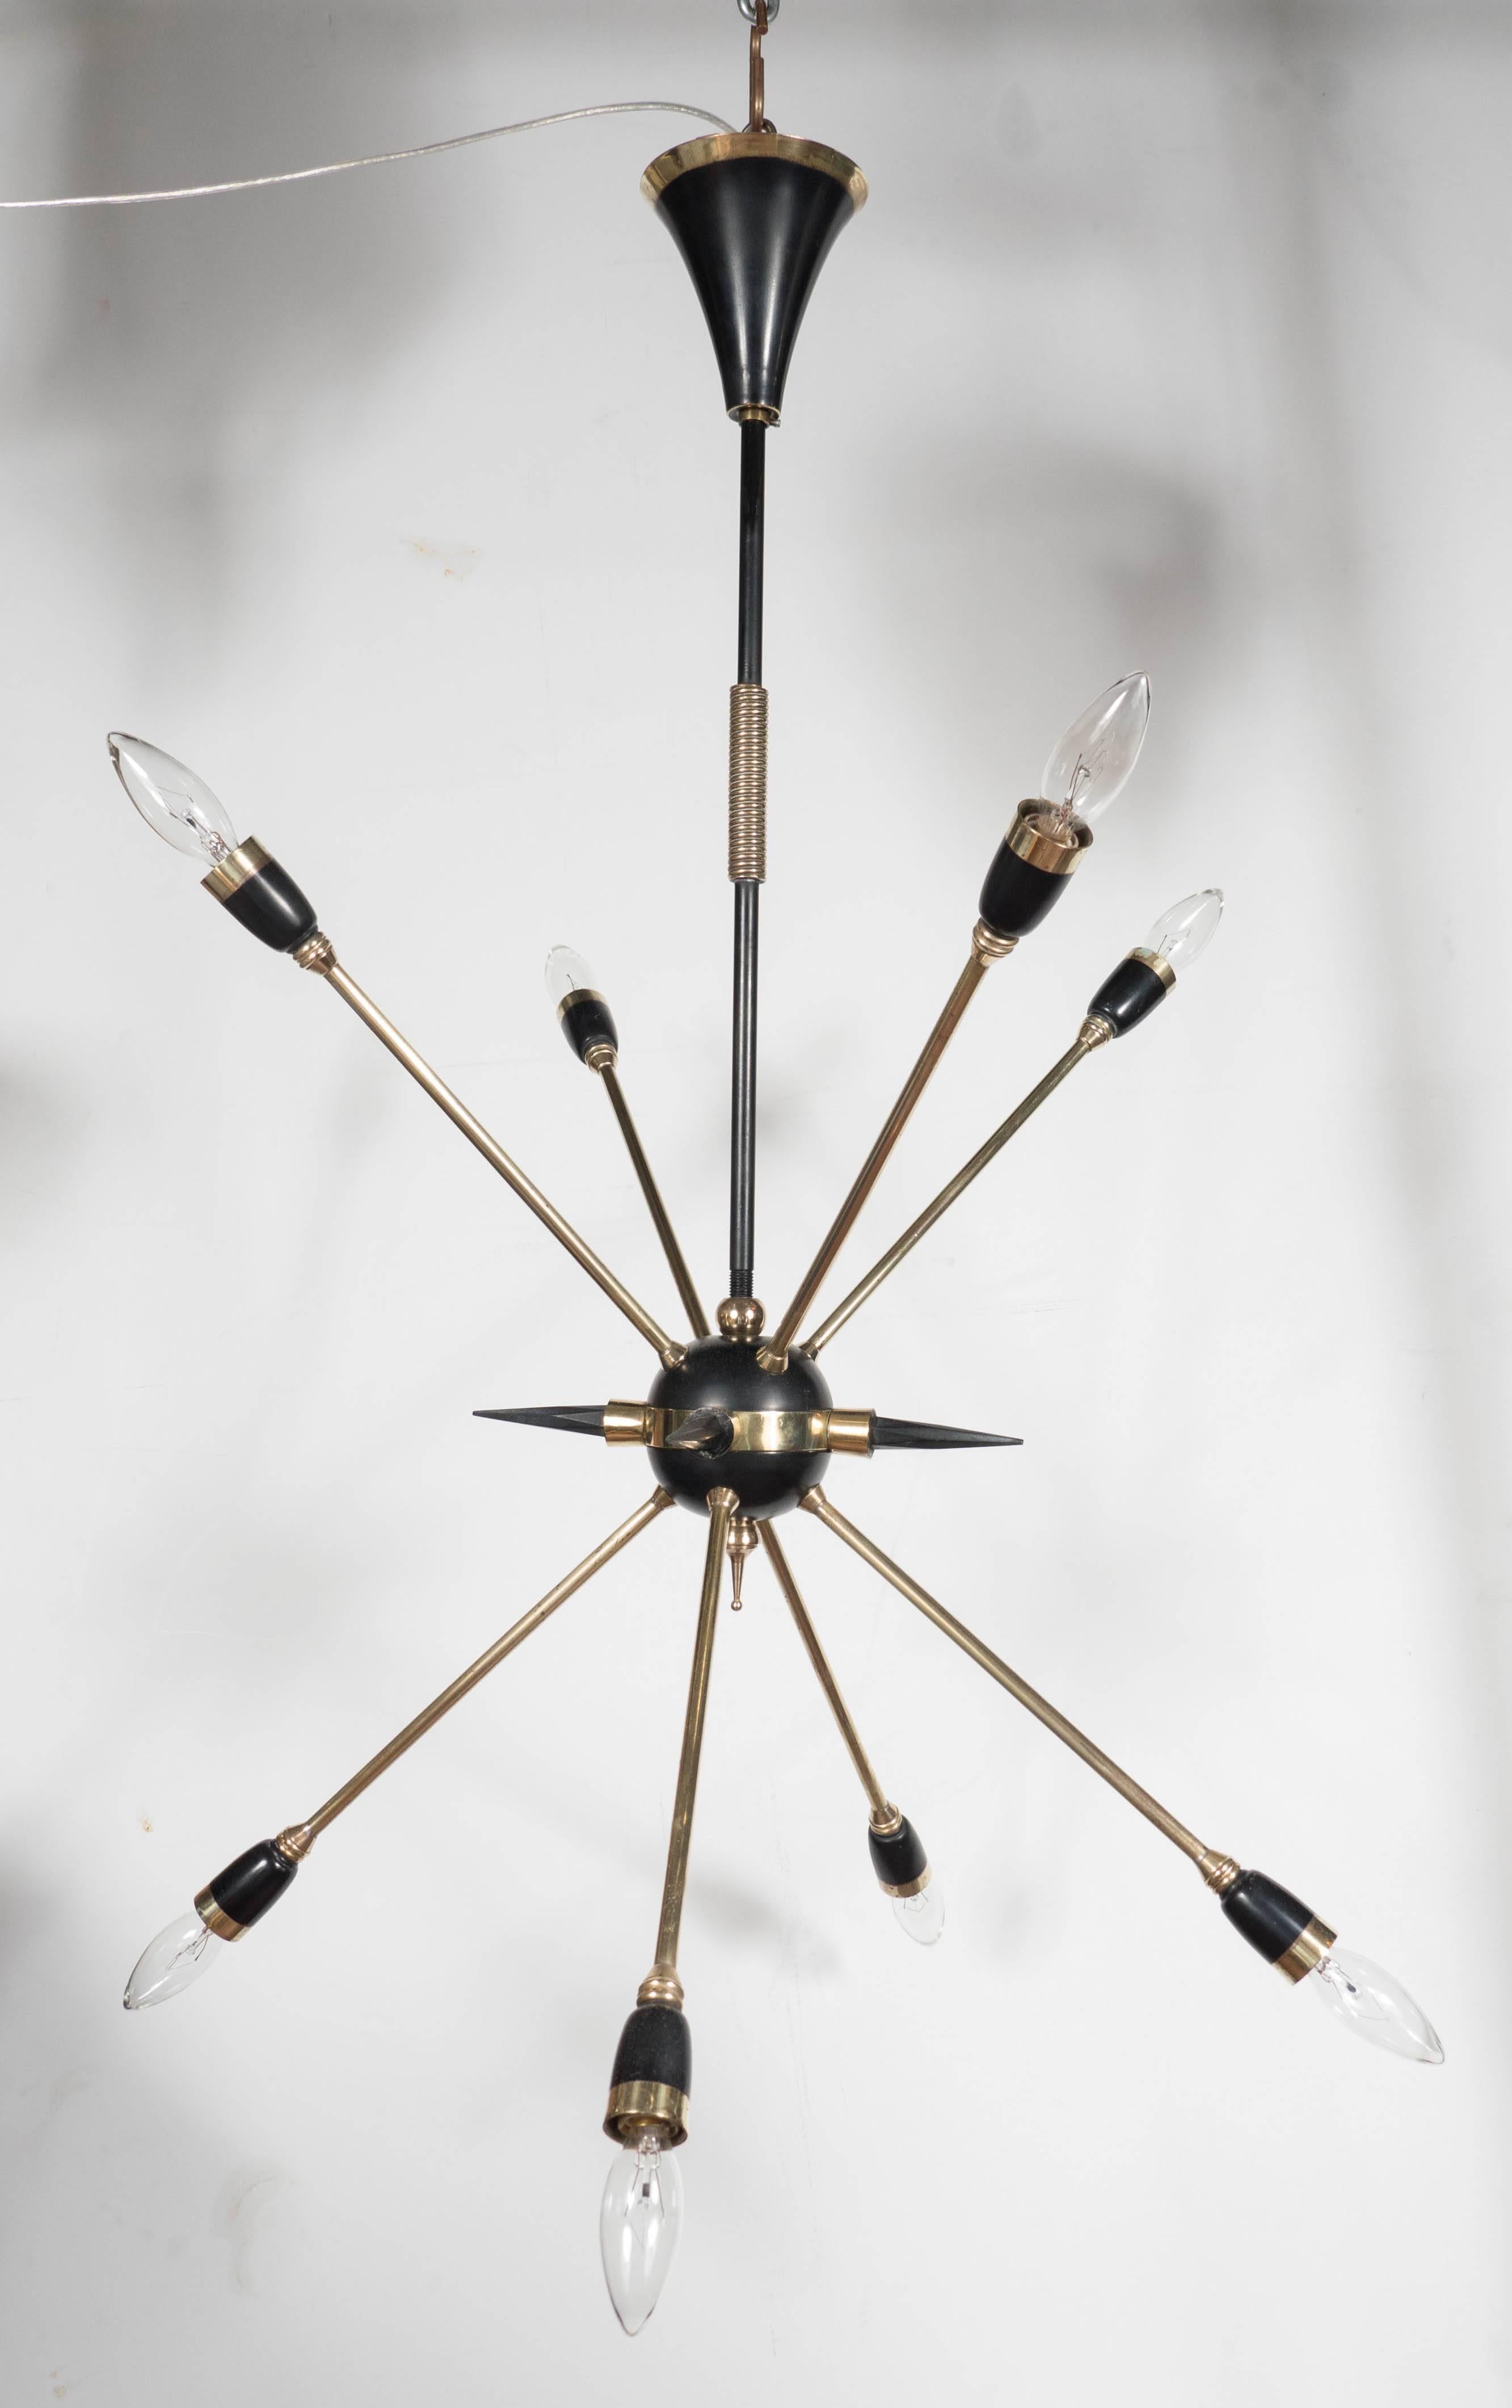 A Mid-Century Modernist Italian Sputnik chandelier with eight arms and spike detailing in the manner of Stilnovo. From a black enameled central ball stem four spikes and eight arms, each of which support a candelabra socket. Brass detailing